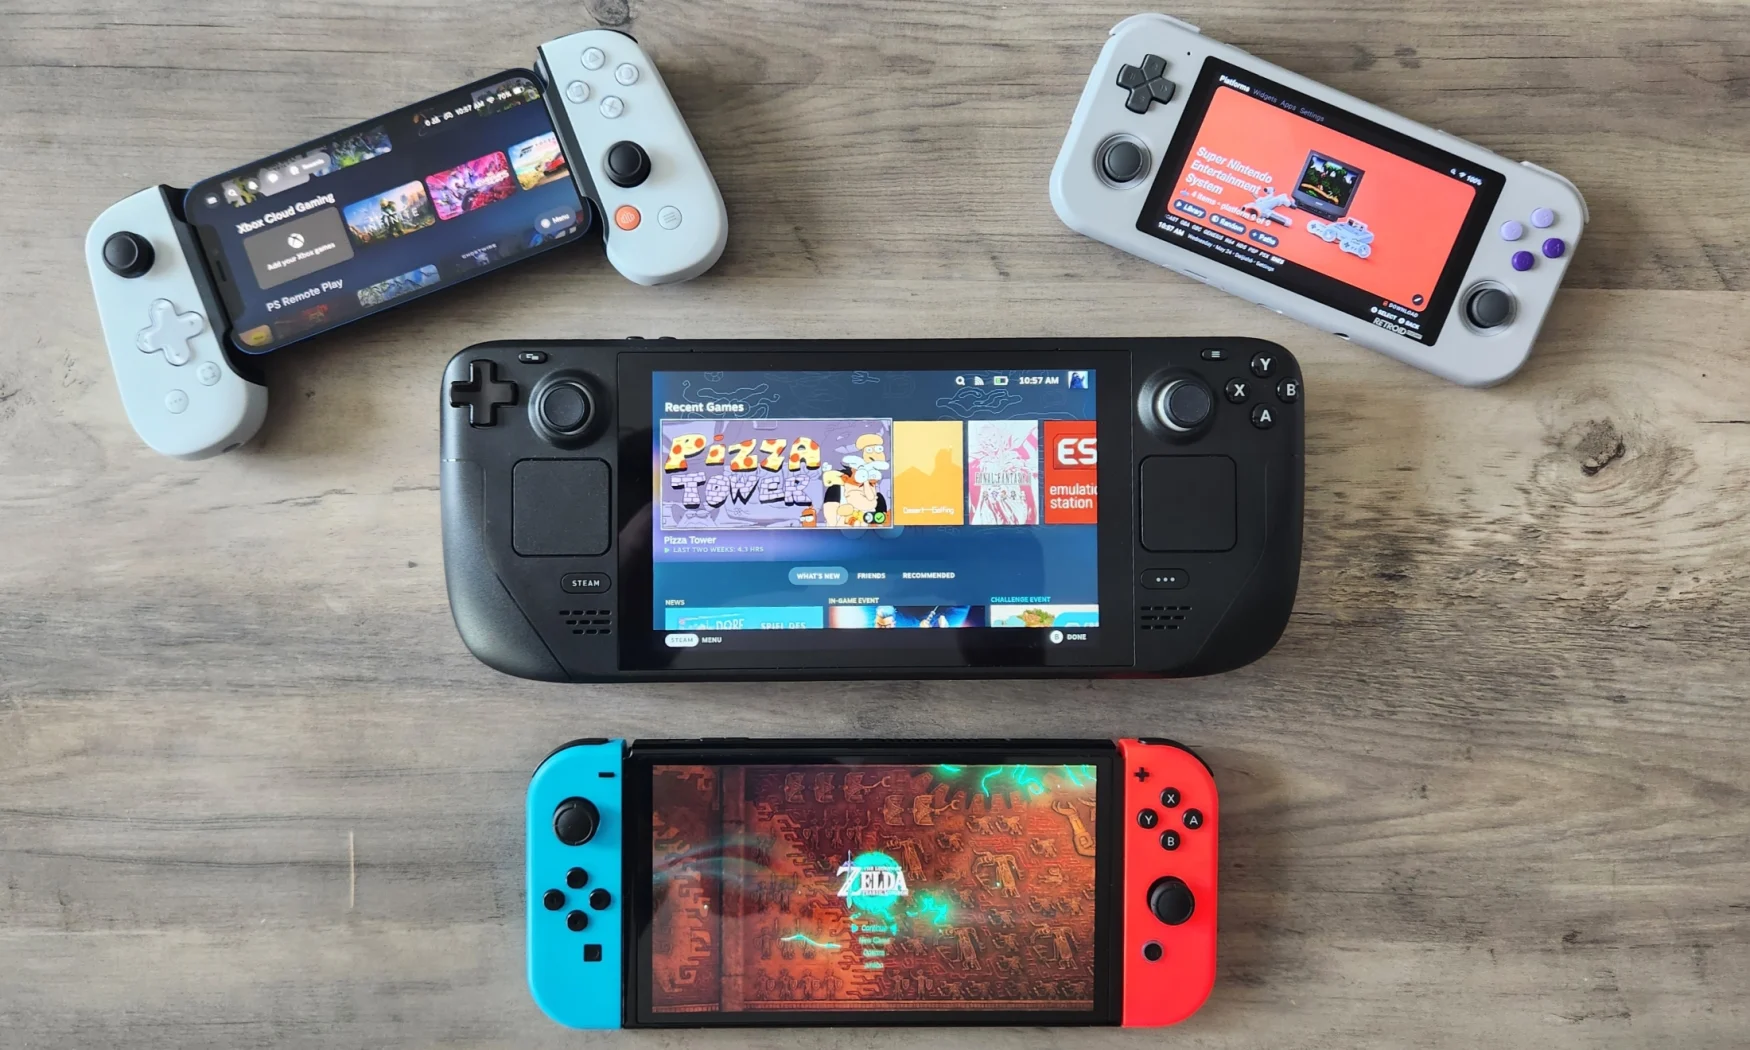 A collection of gaming handhelds rest on a wooden tabletop. The handhelds include the Nintendo Switch - OLED Model, Valve Steam Deck and the Retroid Pocket 3, as well as an iPhone 12 mini hooked up to a Backbone One mobile game controller.